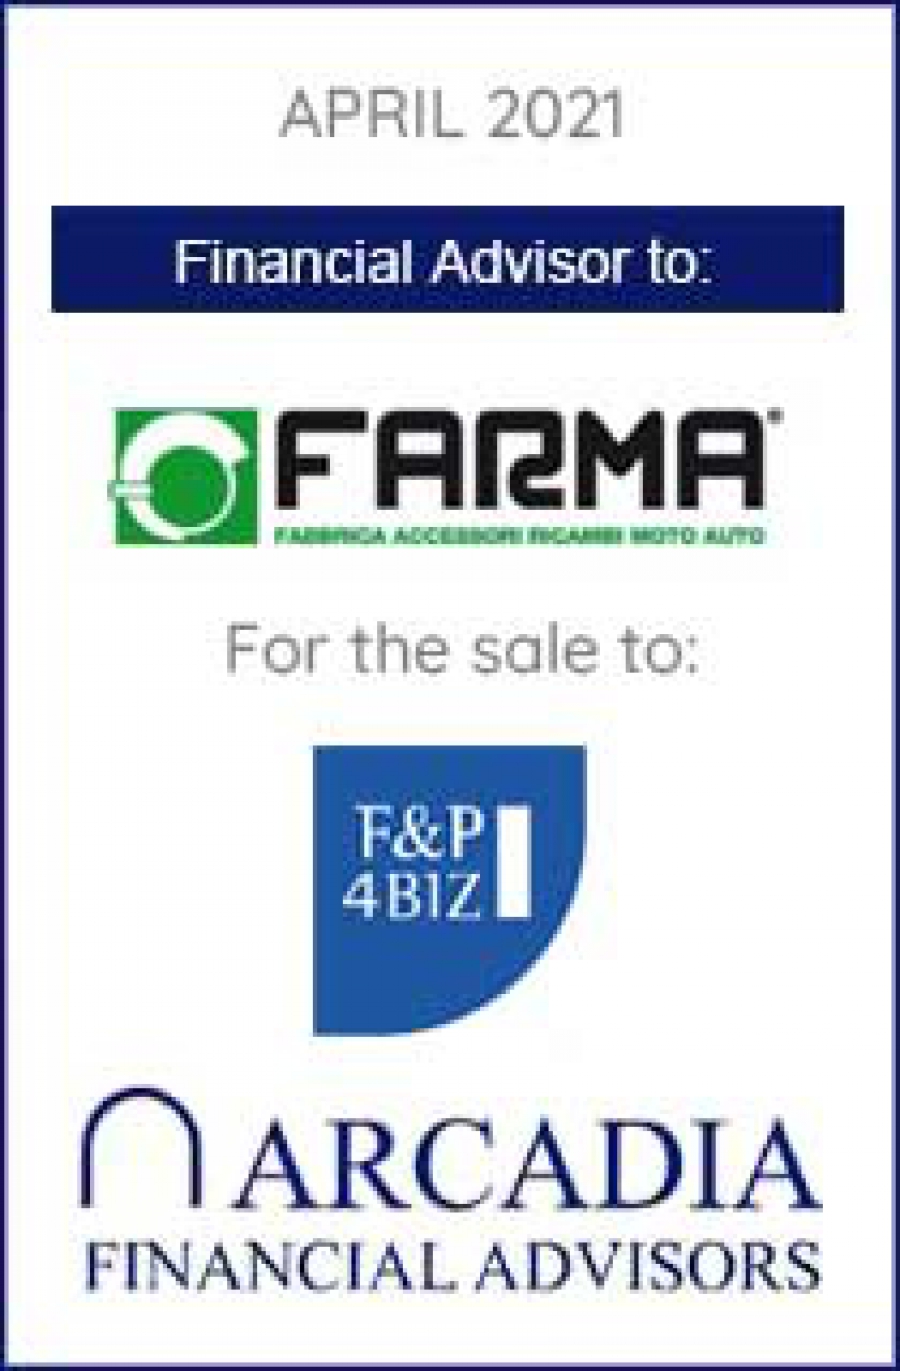 Transaction completed with Farma